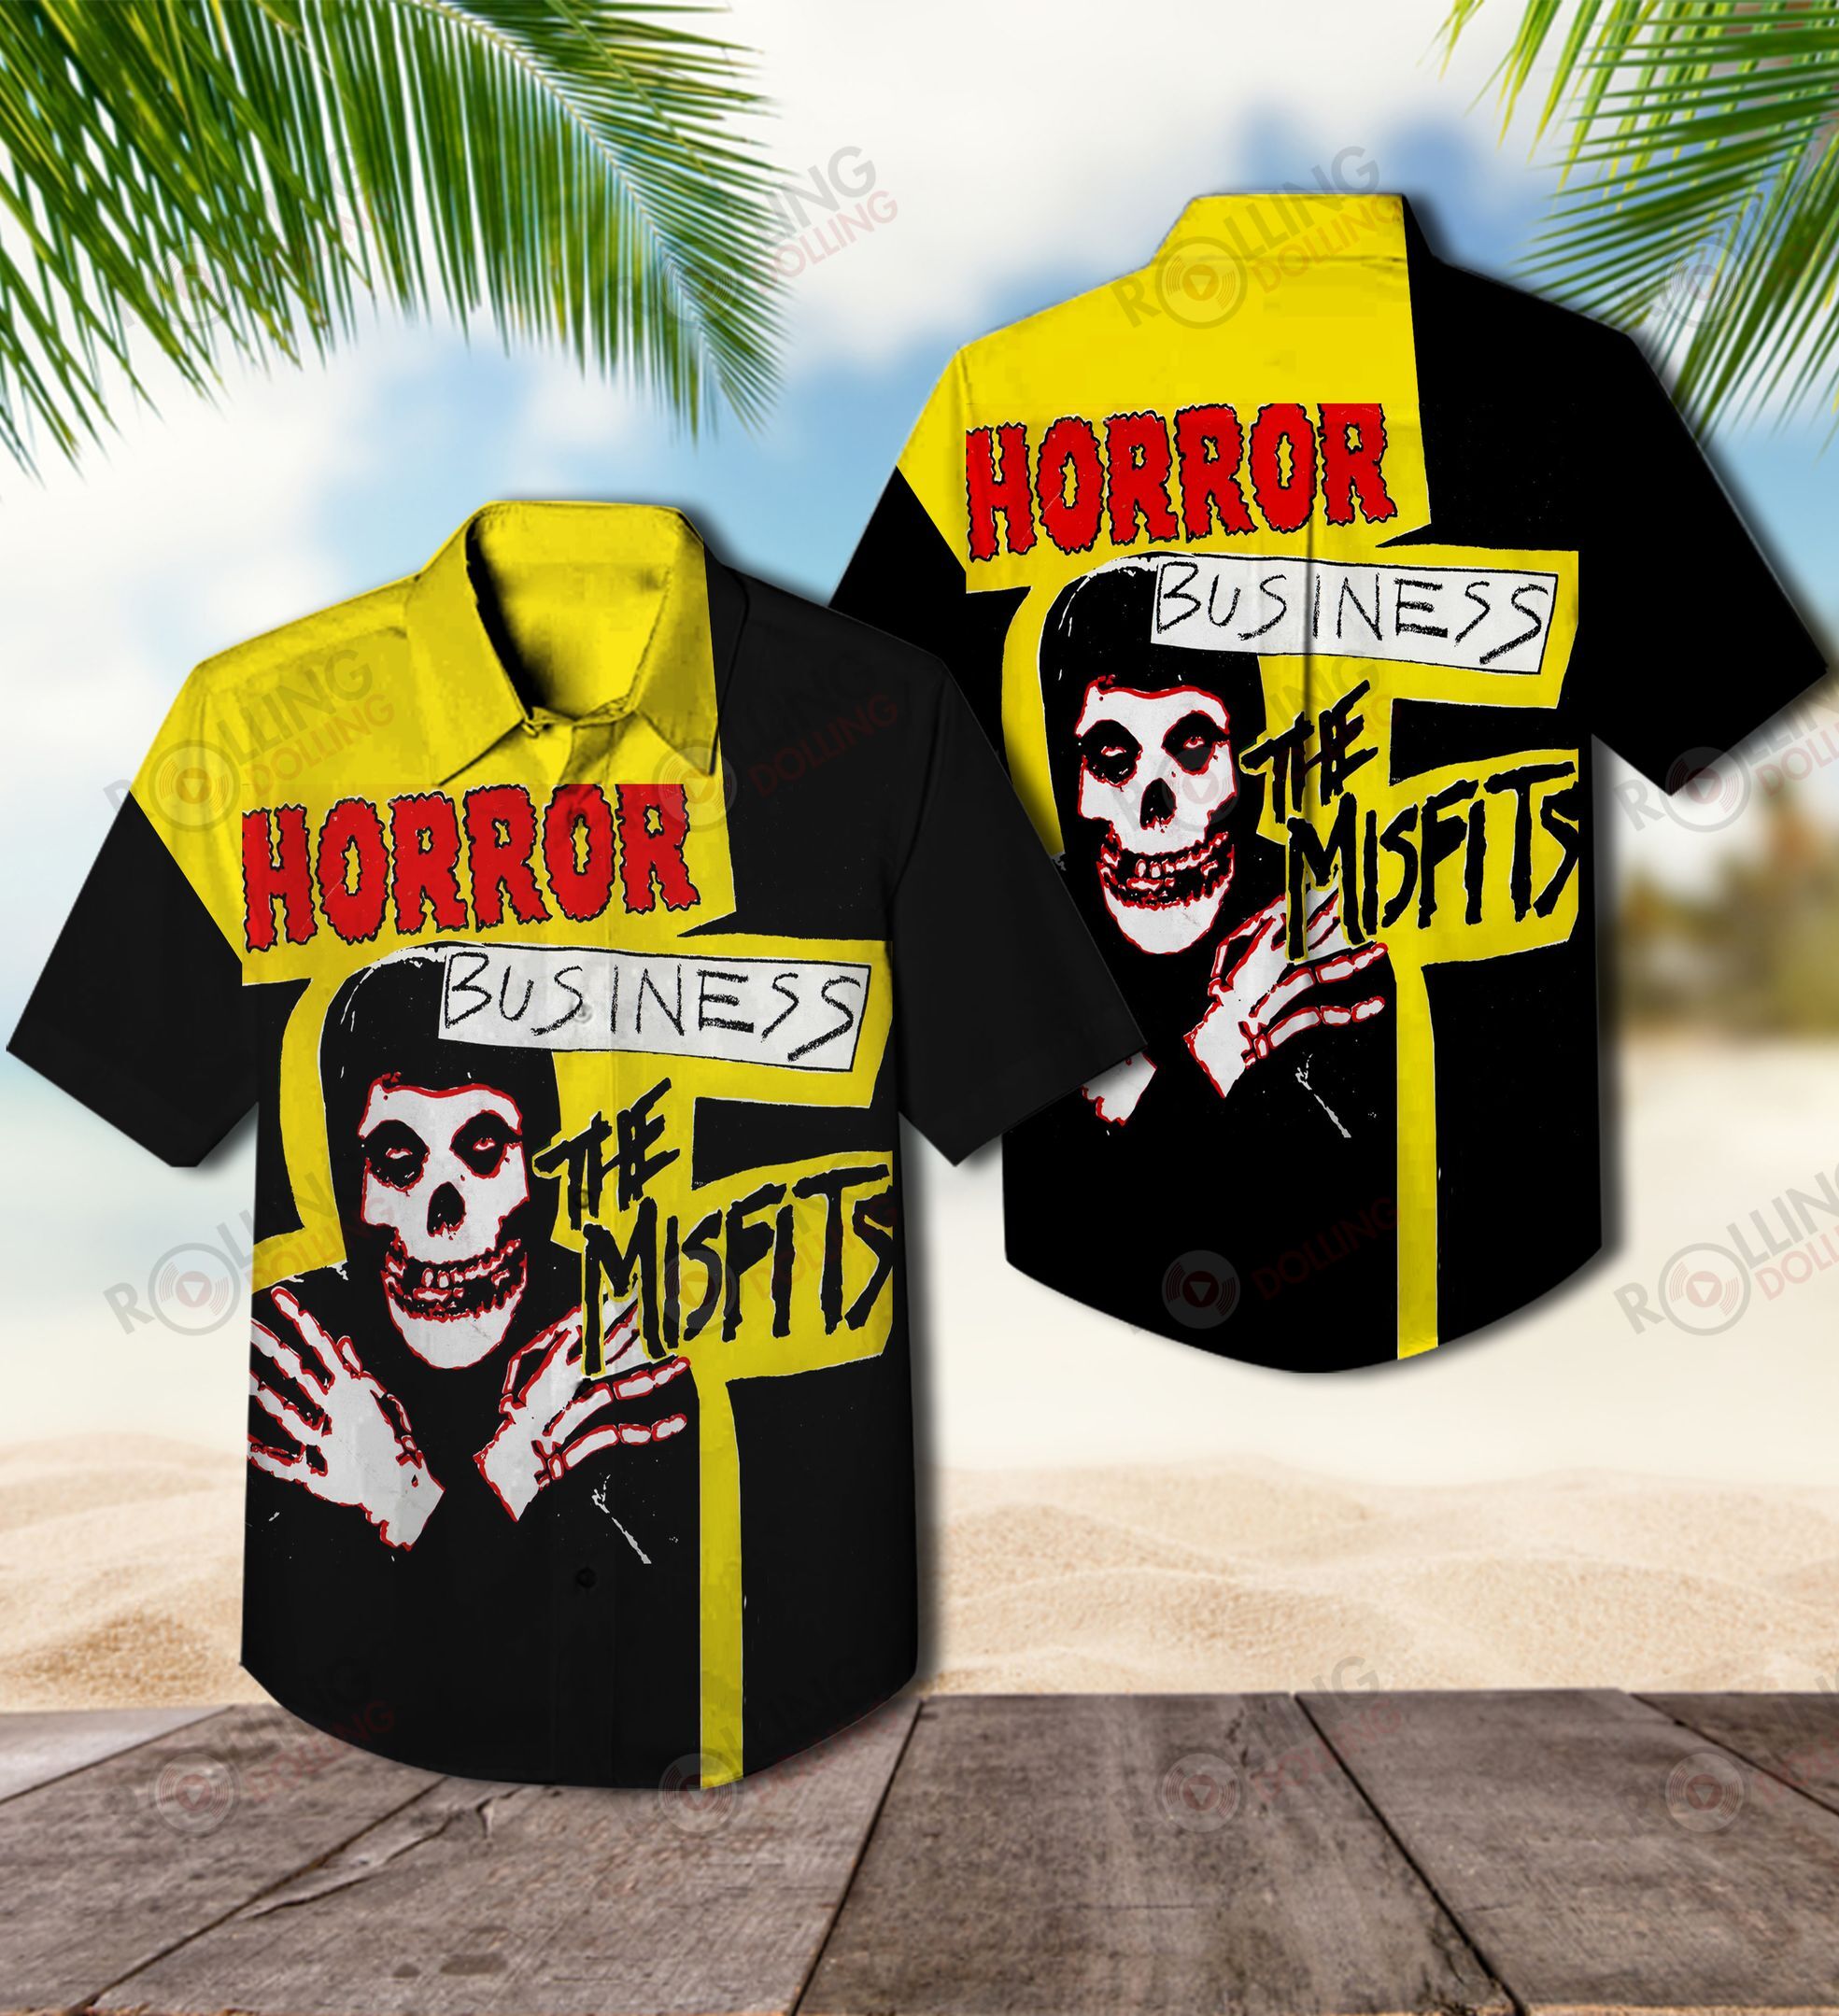 This would make a great gift for any fan who loves Hawaiian Shirt as well as Rock band 23